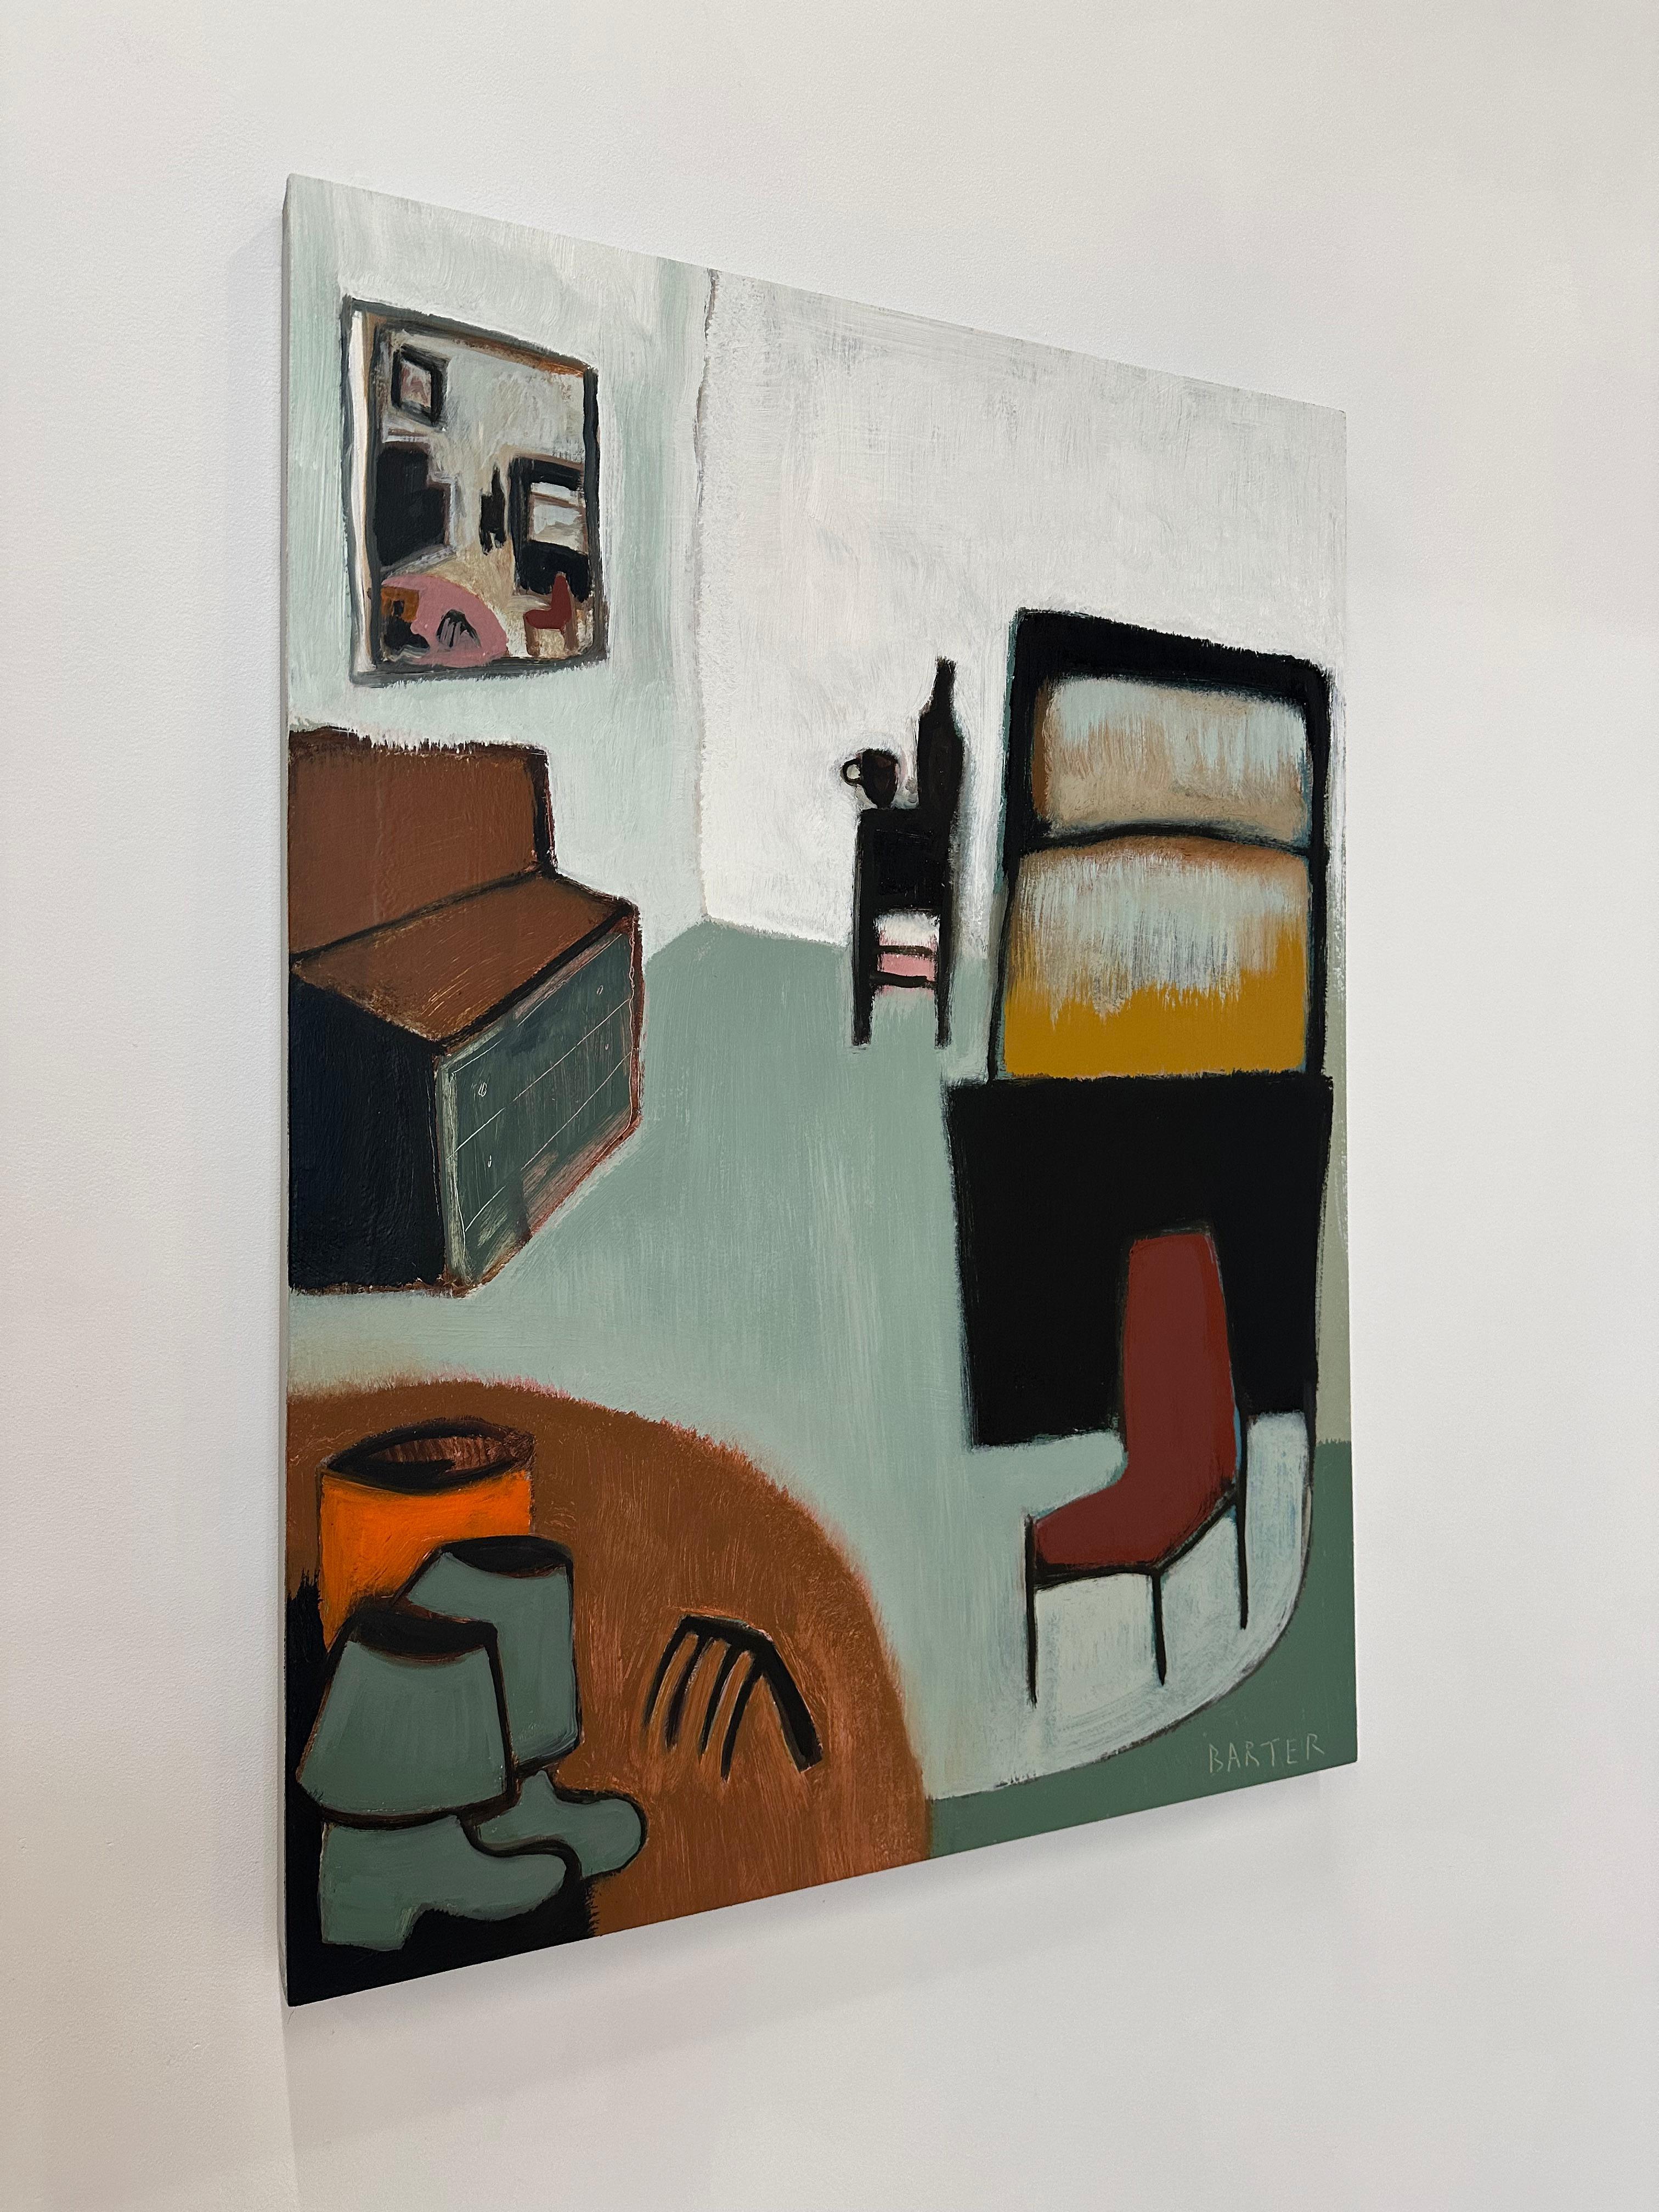 Wormdigger's Bedroom, Golden Yellow Ochre Bed, Mirror, Boots, Burgundy Red Chair - Contemporary Painting by Matt Barter